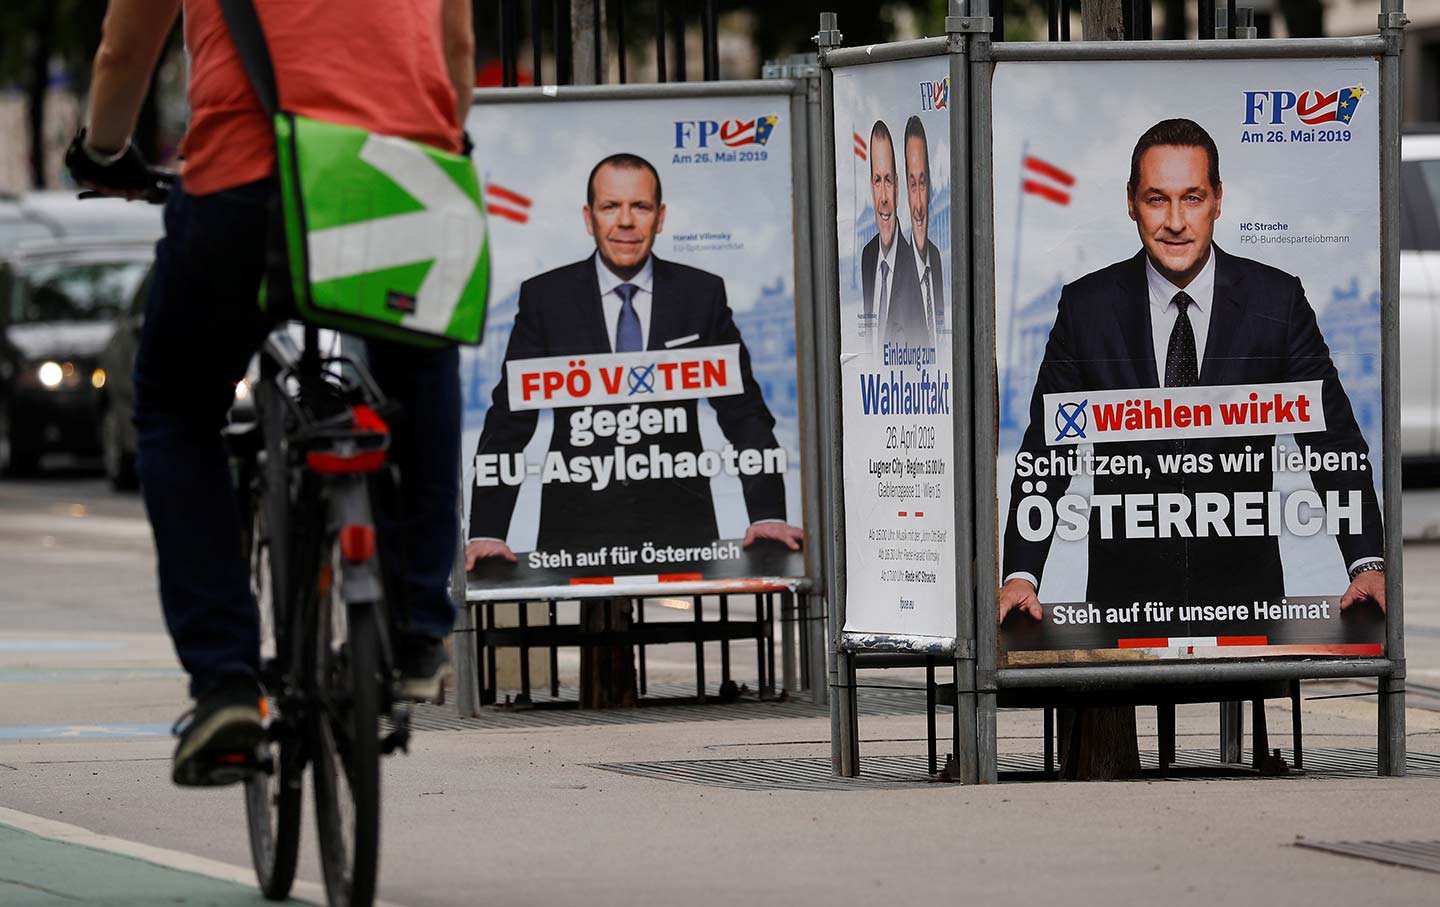 Austrian Freedom Party campaign posters